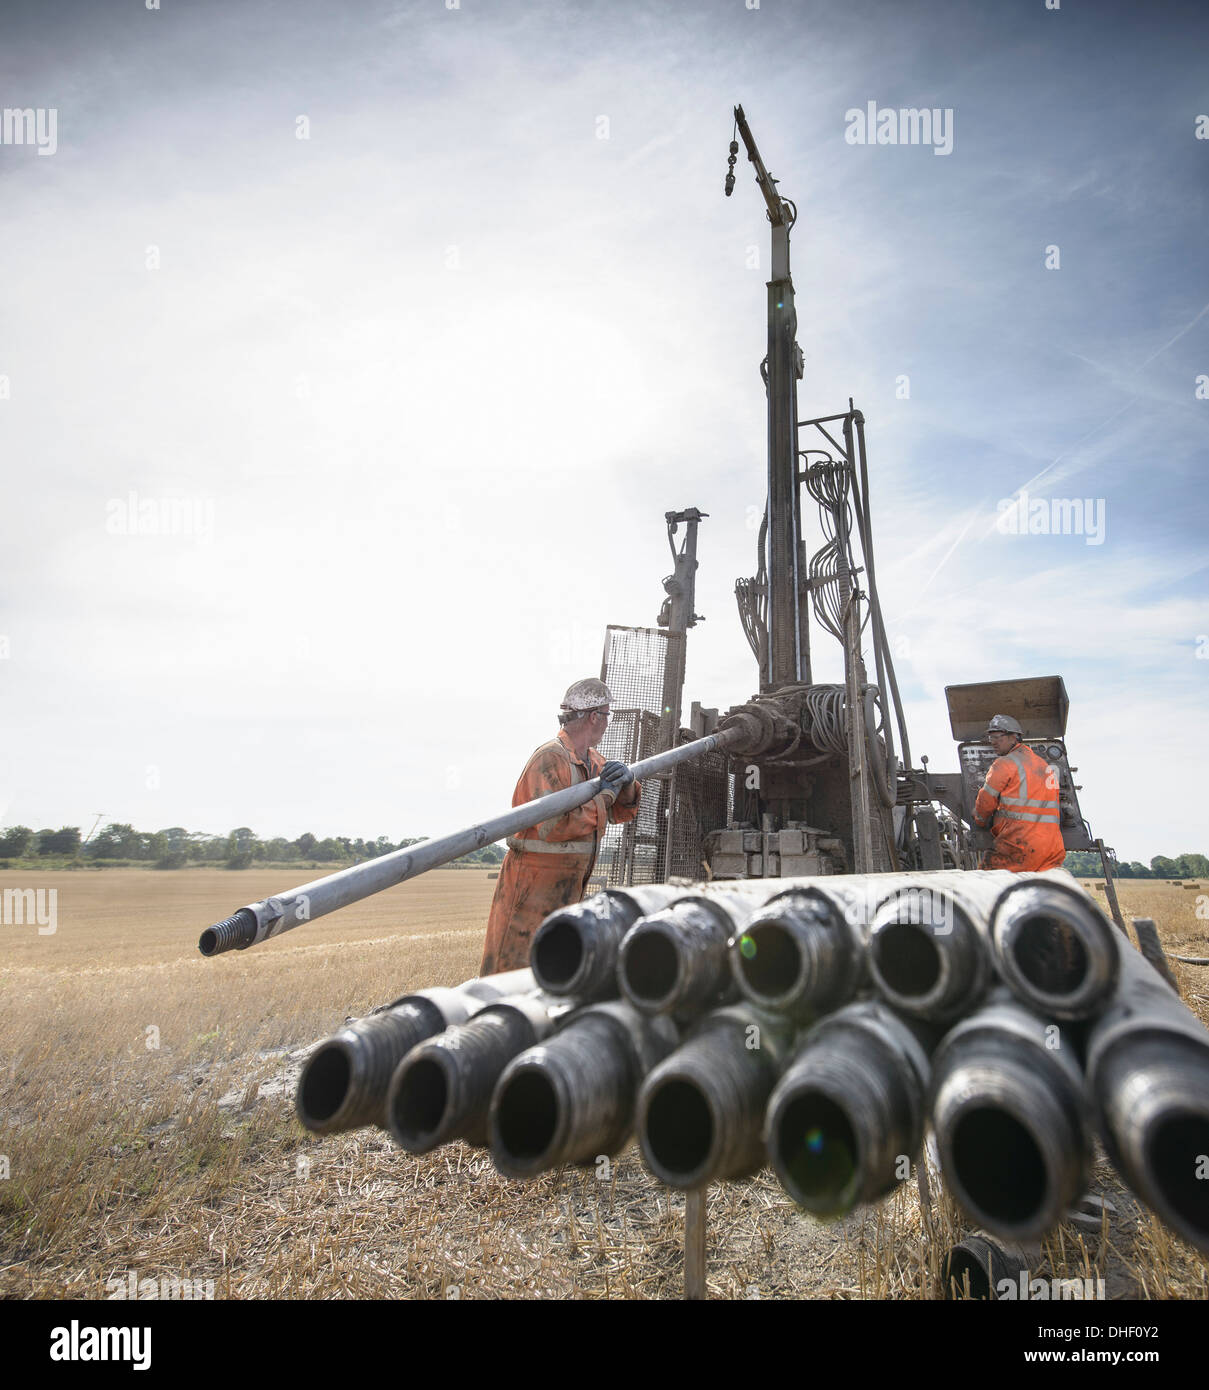 Workers operating drilling rig in field Stock Photo